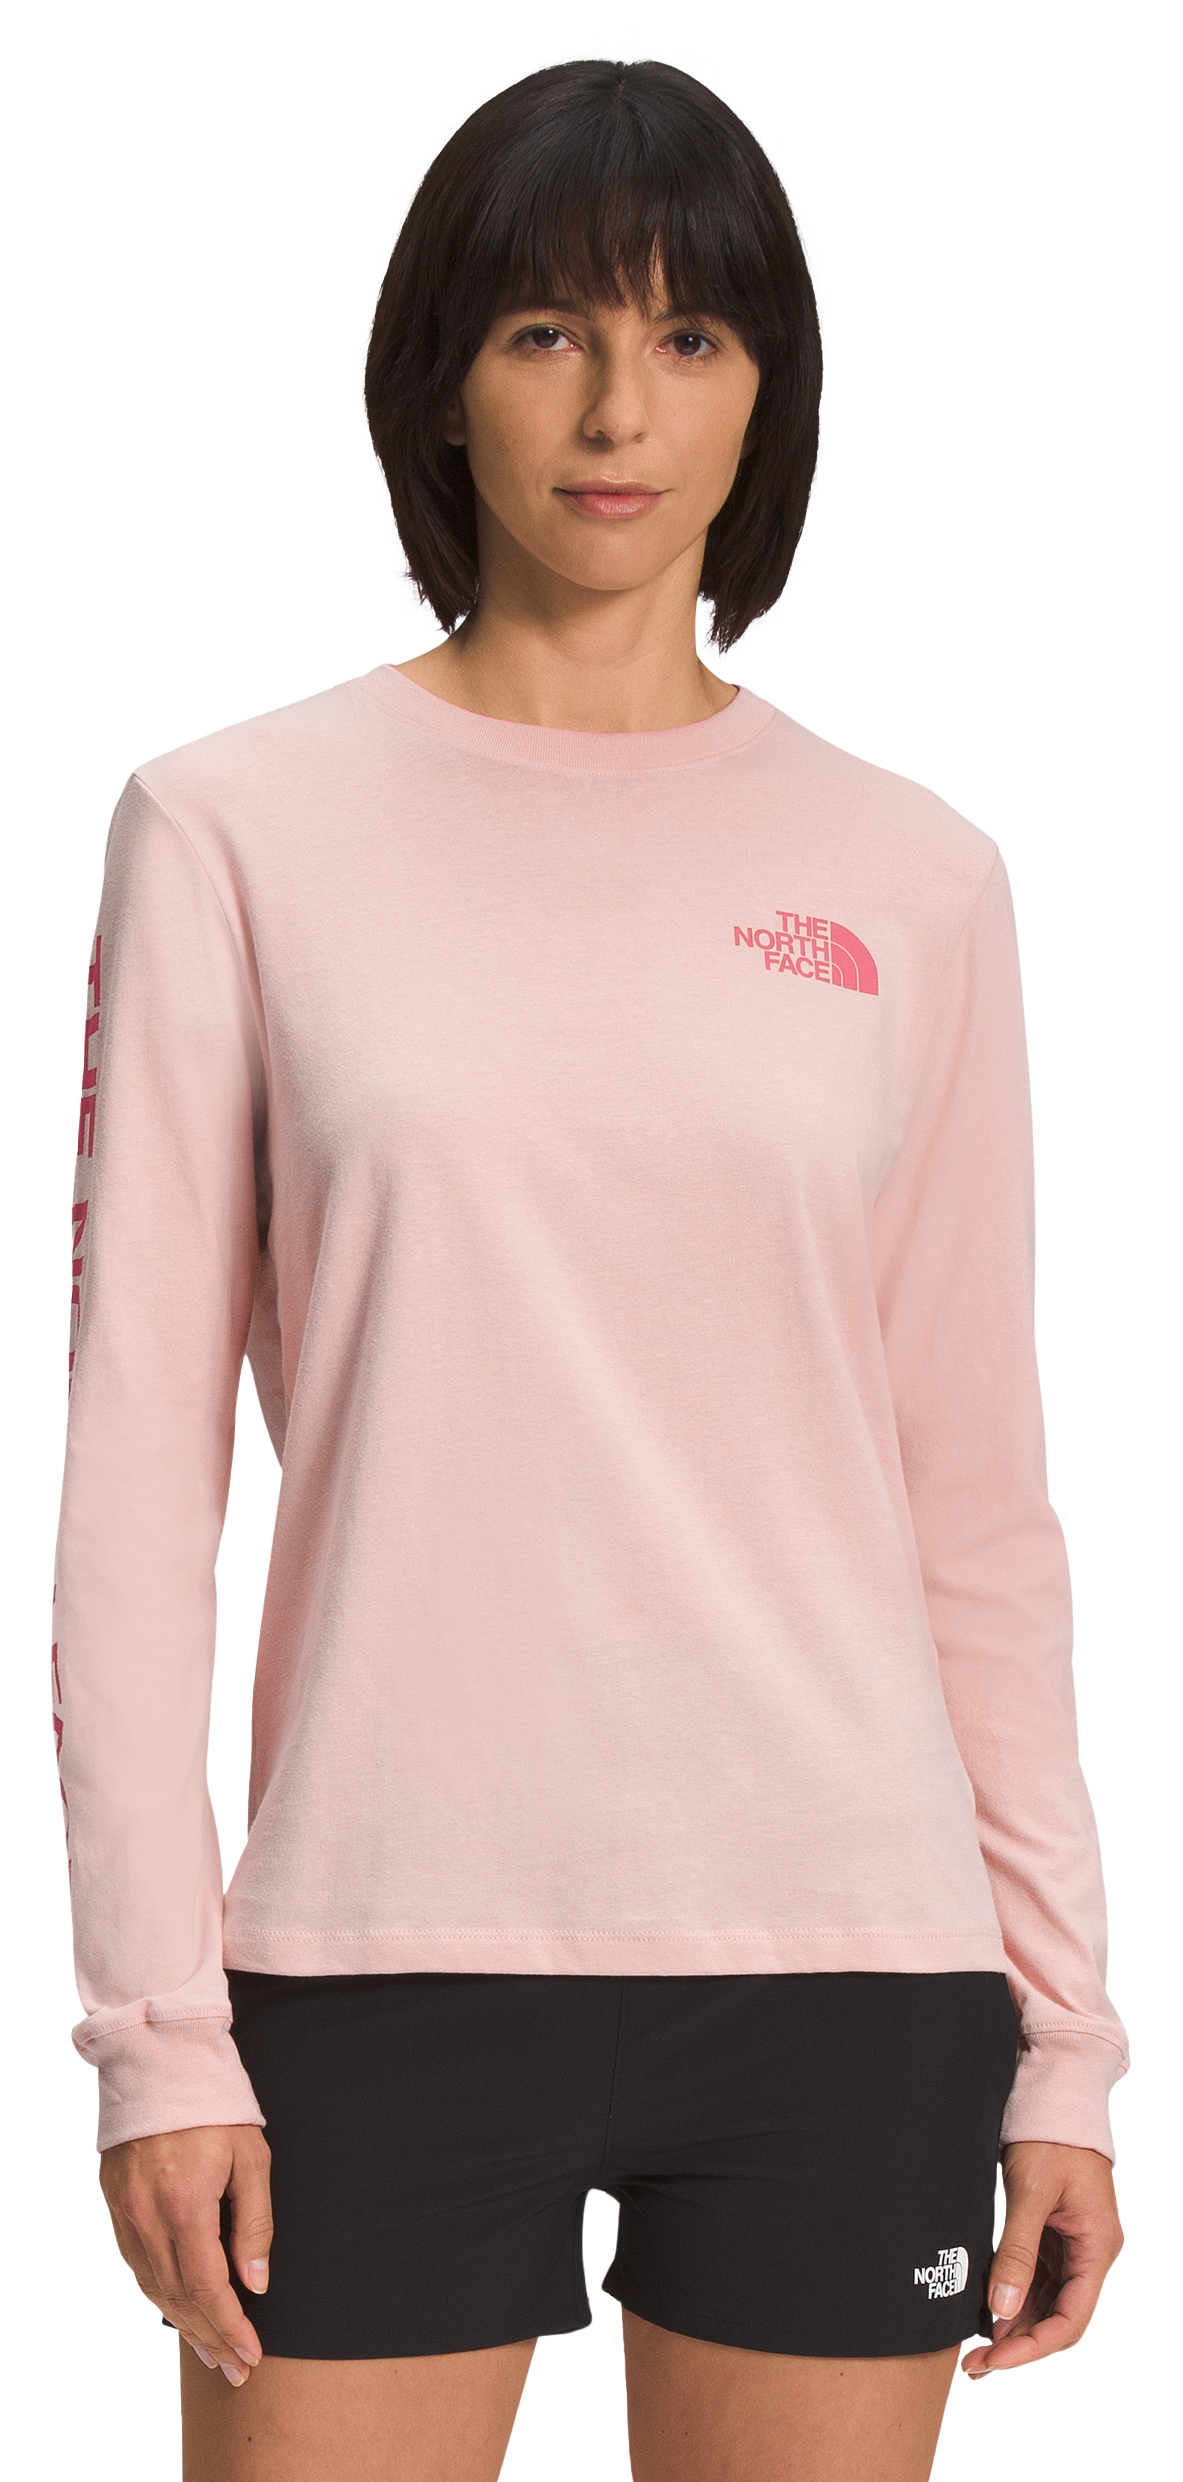 The North Face Hit Graphic Long-Sleeve T-Shirt for Ladies - Pink Moss/Cosmo Pink - XXL